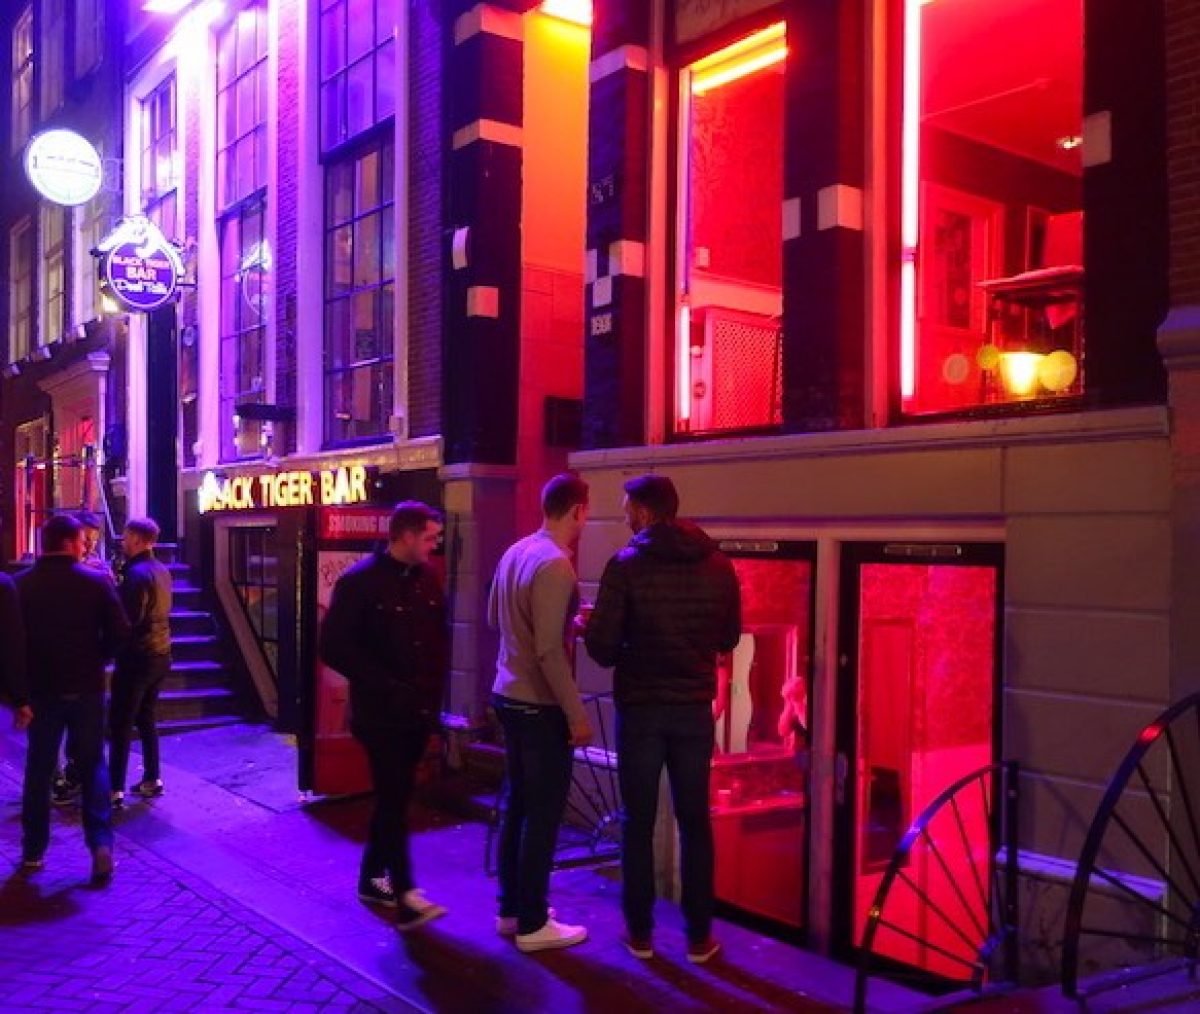 Amsterdam Redlight - 10x Amsterdam Red Light District Prices - What does everything cost?Amsterdam  Red Light District Tours